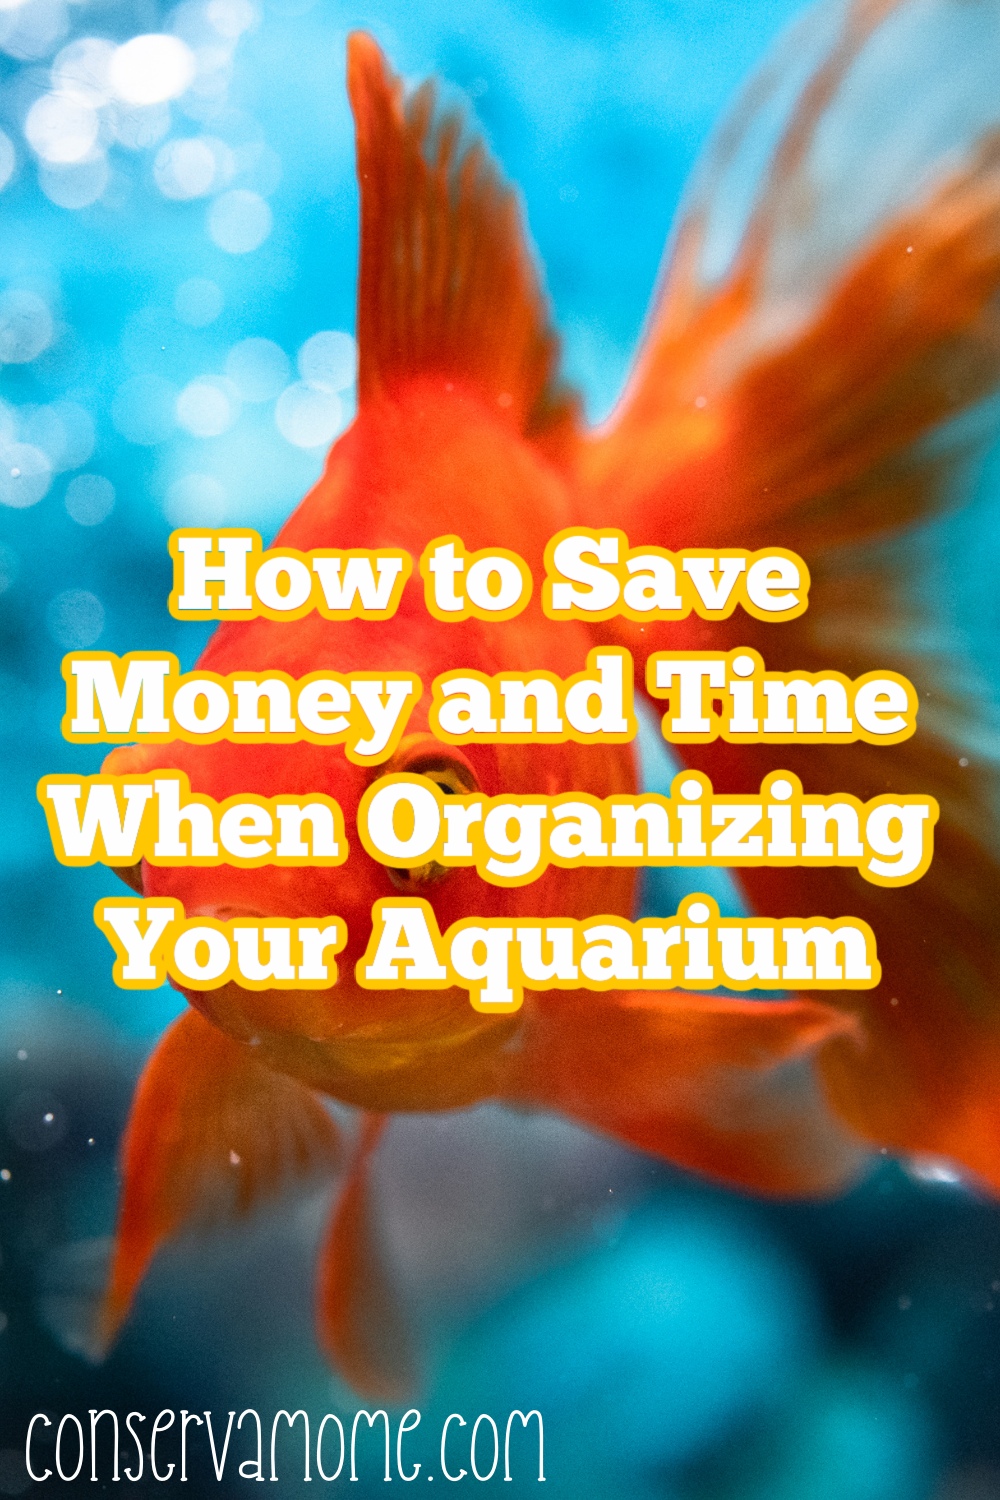 How to Save Money and Time When Organizing Your Aquarium